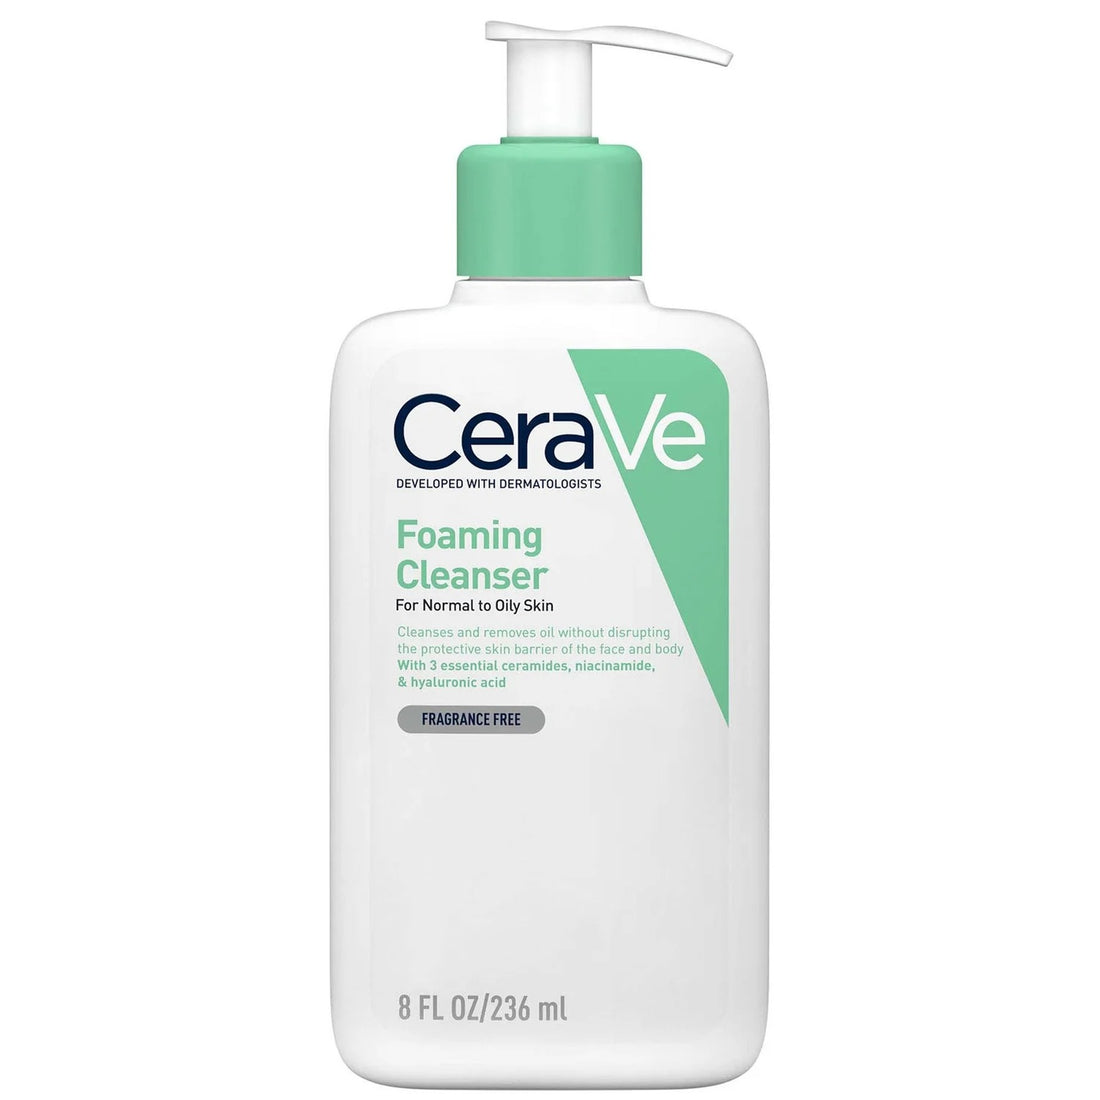 CeraVe Foaming Cleanser with Niacinamide for Normal to Oily Skin